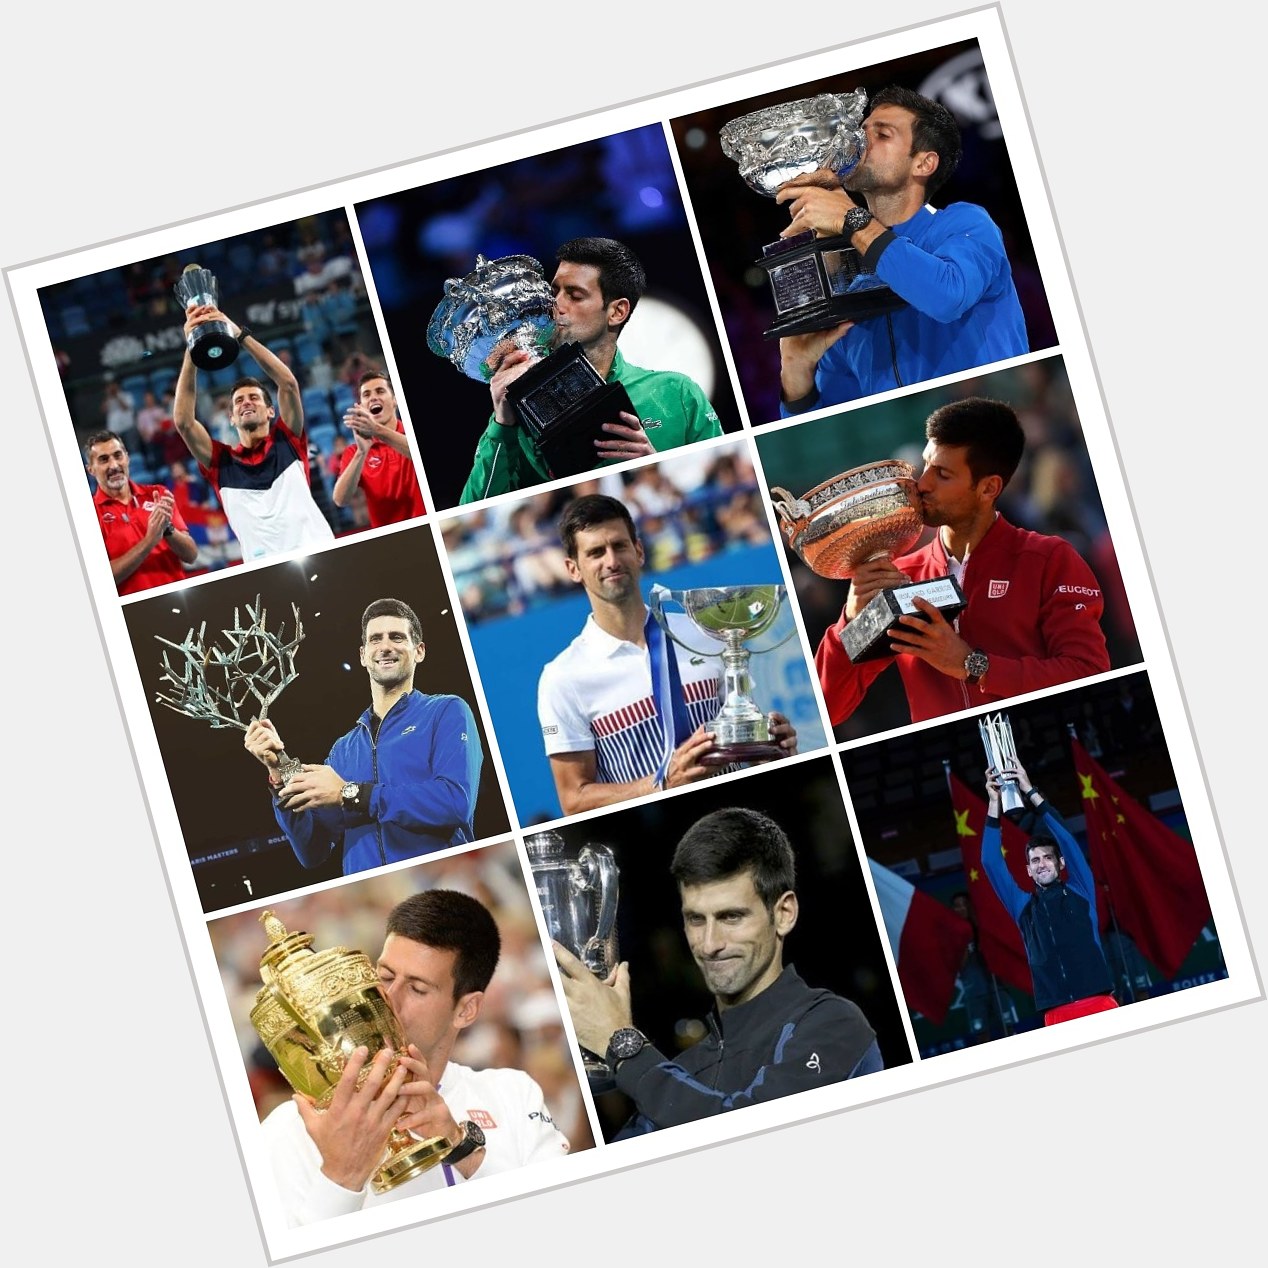 Happy 33rd Birthday to the World Number 1  , Novak Djokovic    The Serb\s biggest weapon is  ________ 